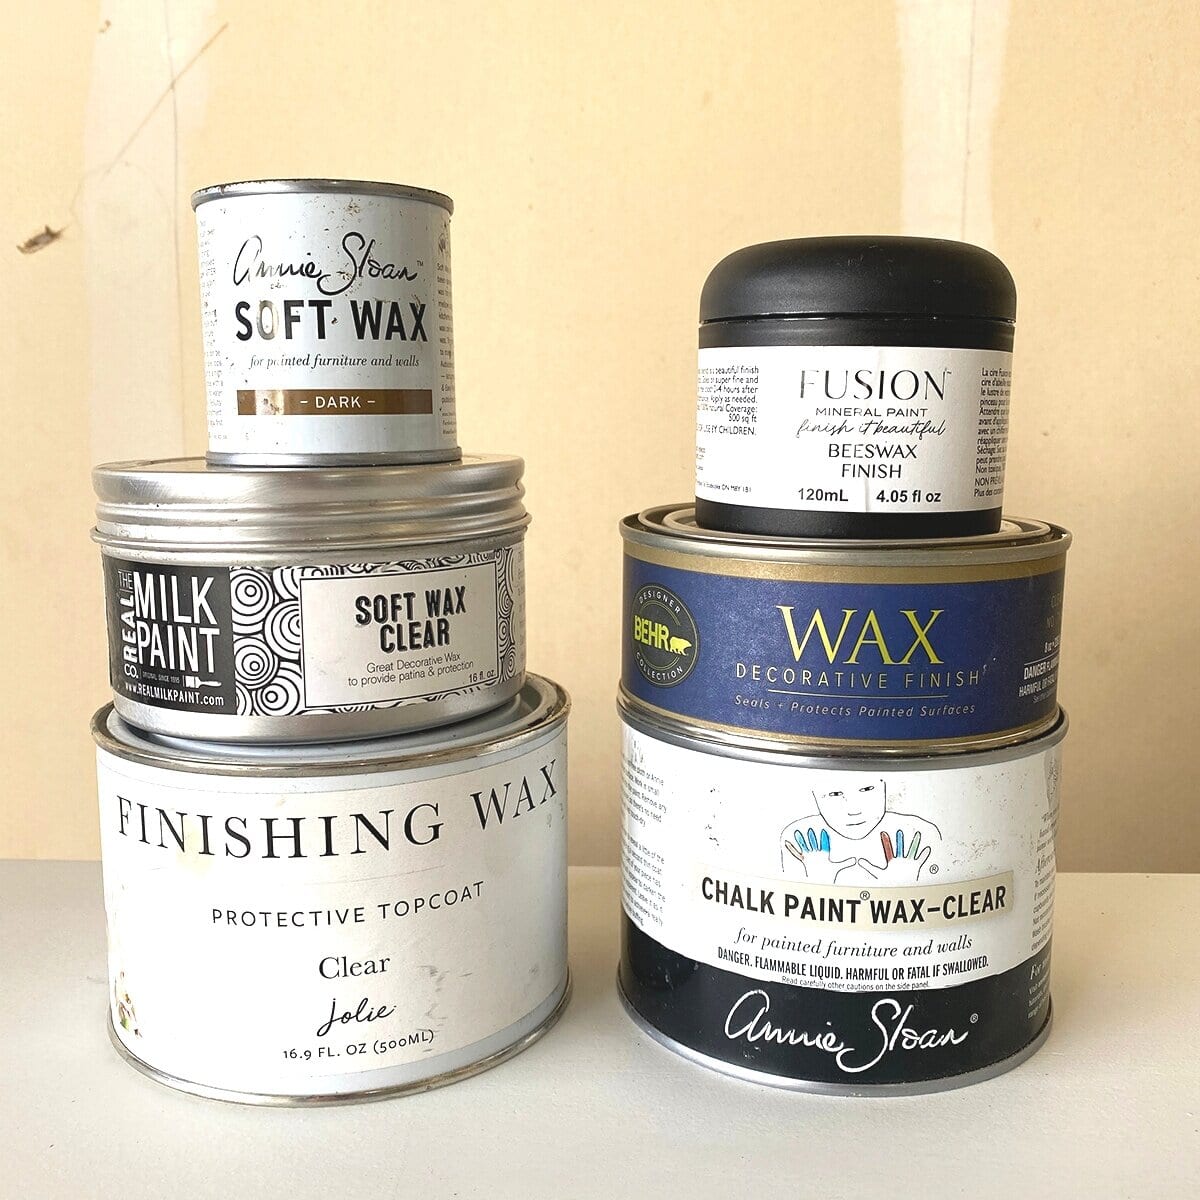 Wax For Chalk Paint: Is It The Right Choice For Your Furniture?